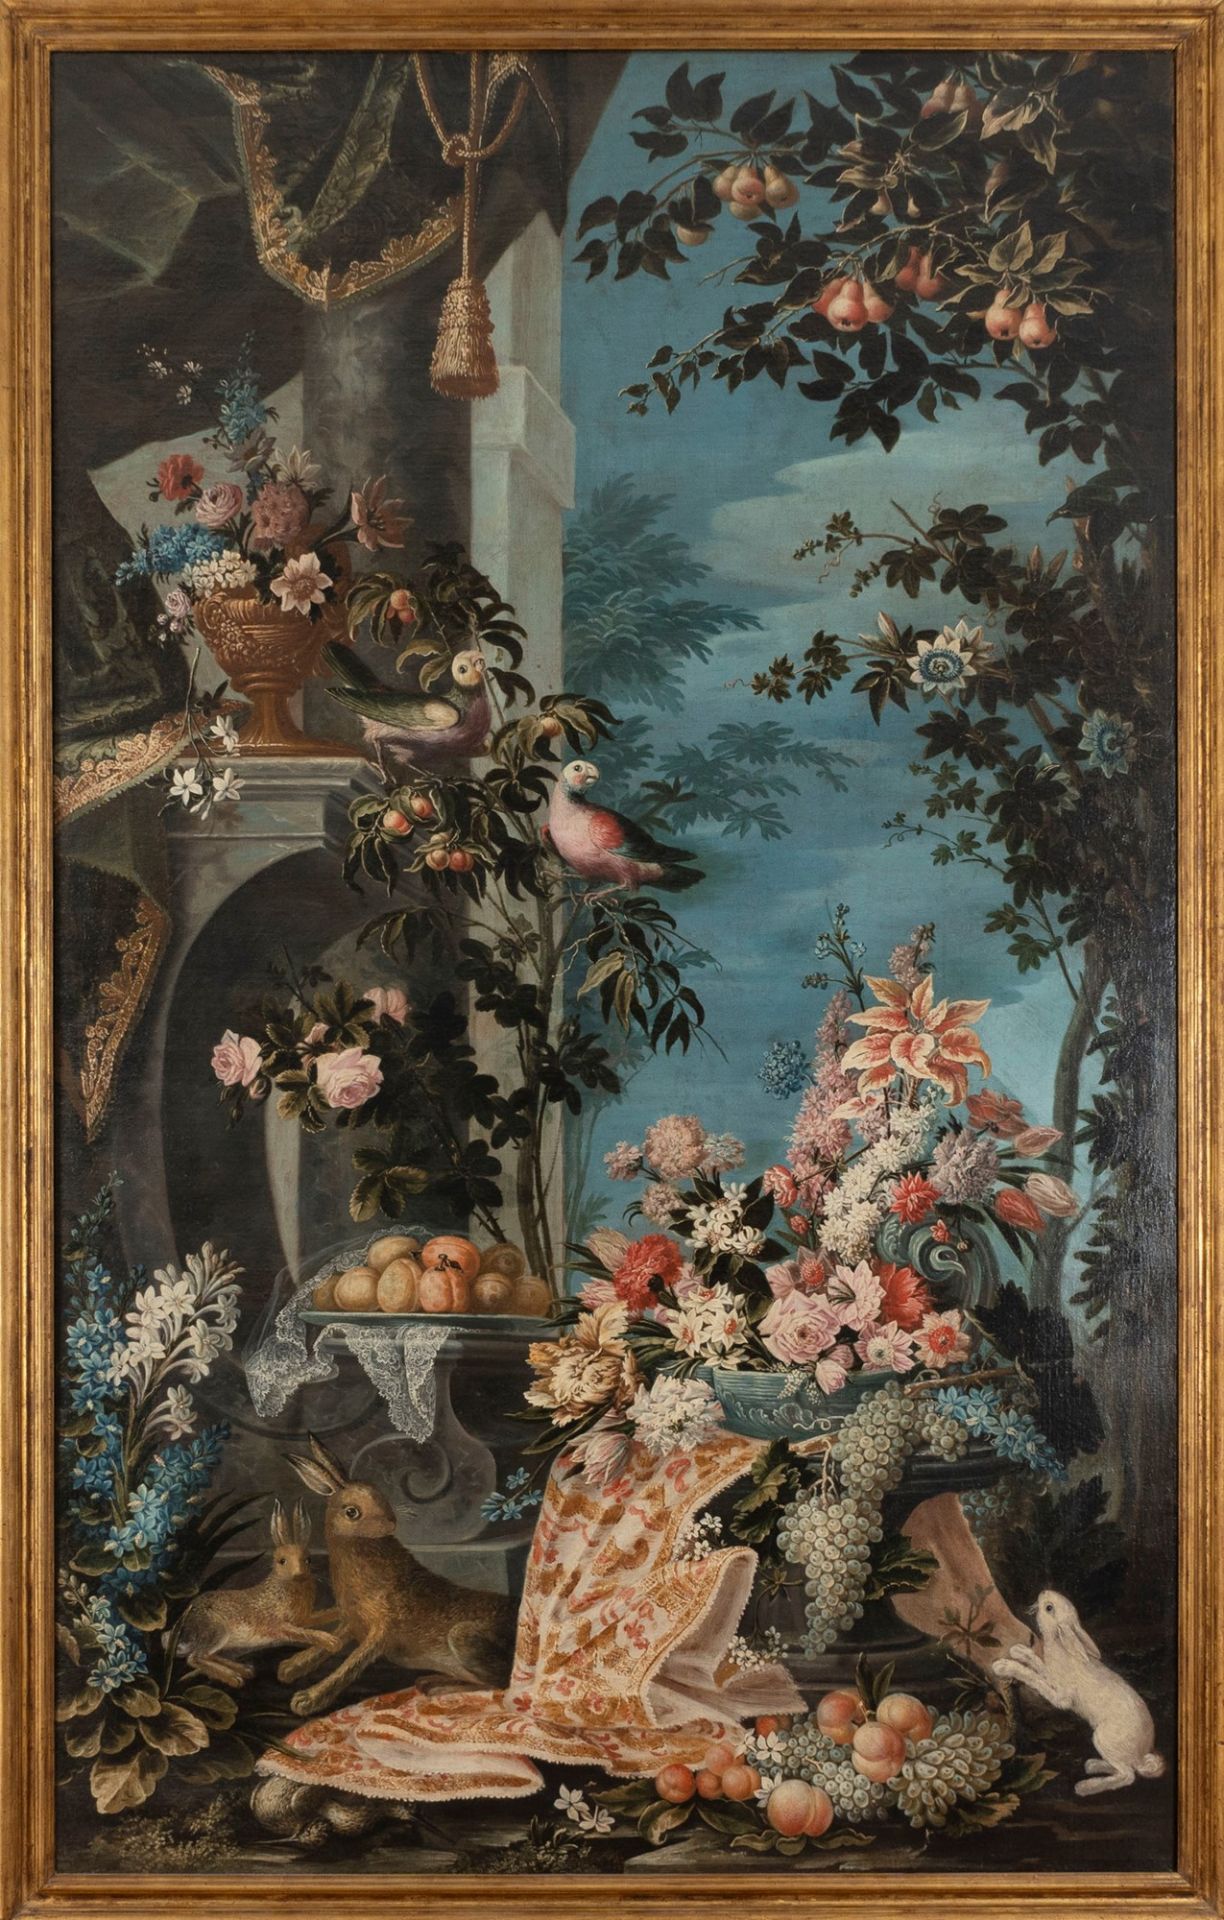 Lombard School, XVIII century - Flowers and fruit in an Italian garden with bunnies and parrots - Image 2 of 8